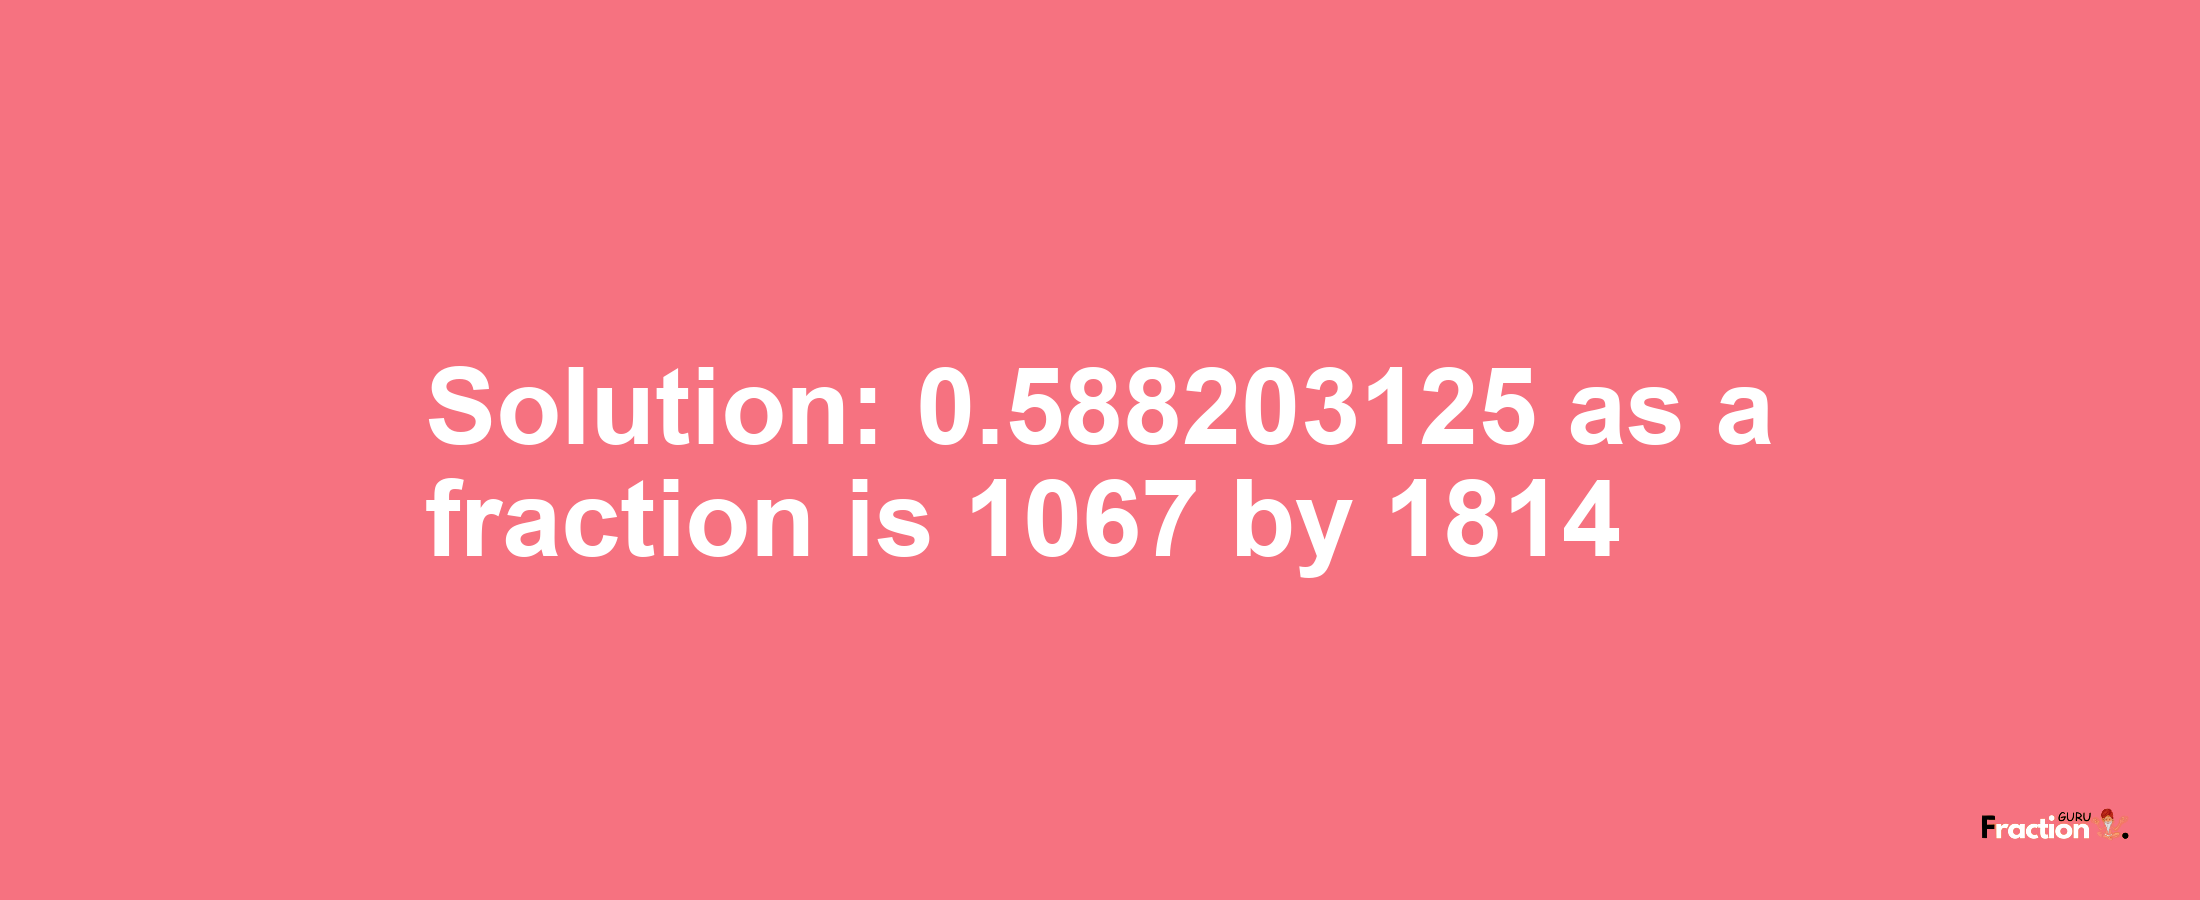 Solution:0.588203125 as a fraction is 1067/1814